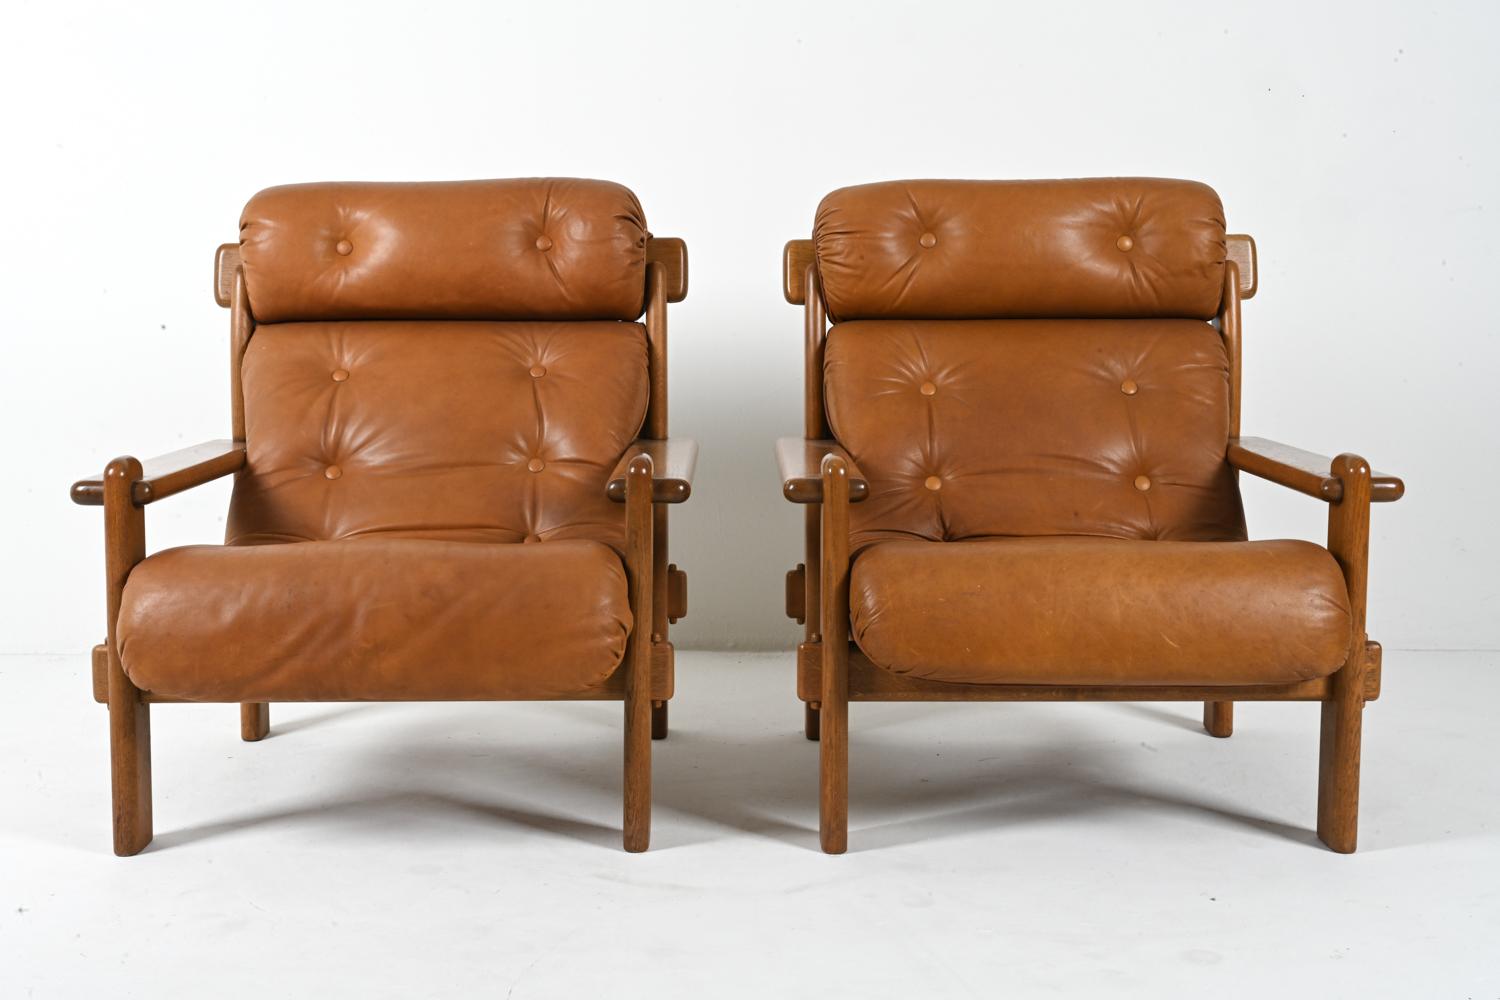 20th Century Pair of European Brutalist Armchairs in Oak & Leather, c. 1970's For Sale